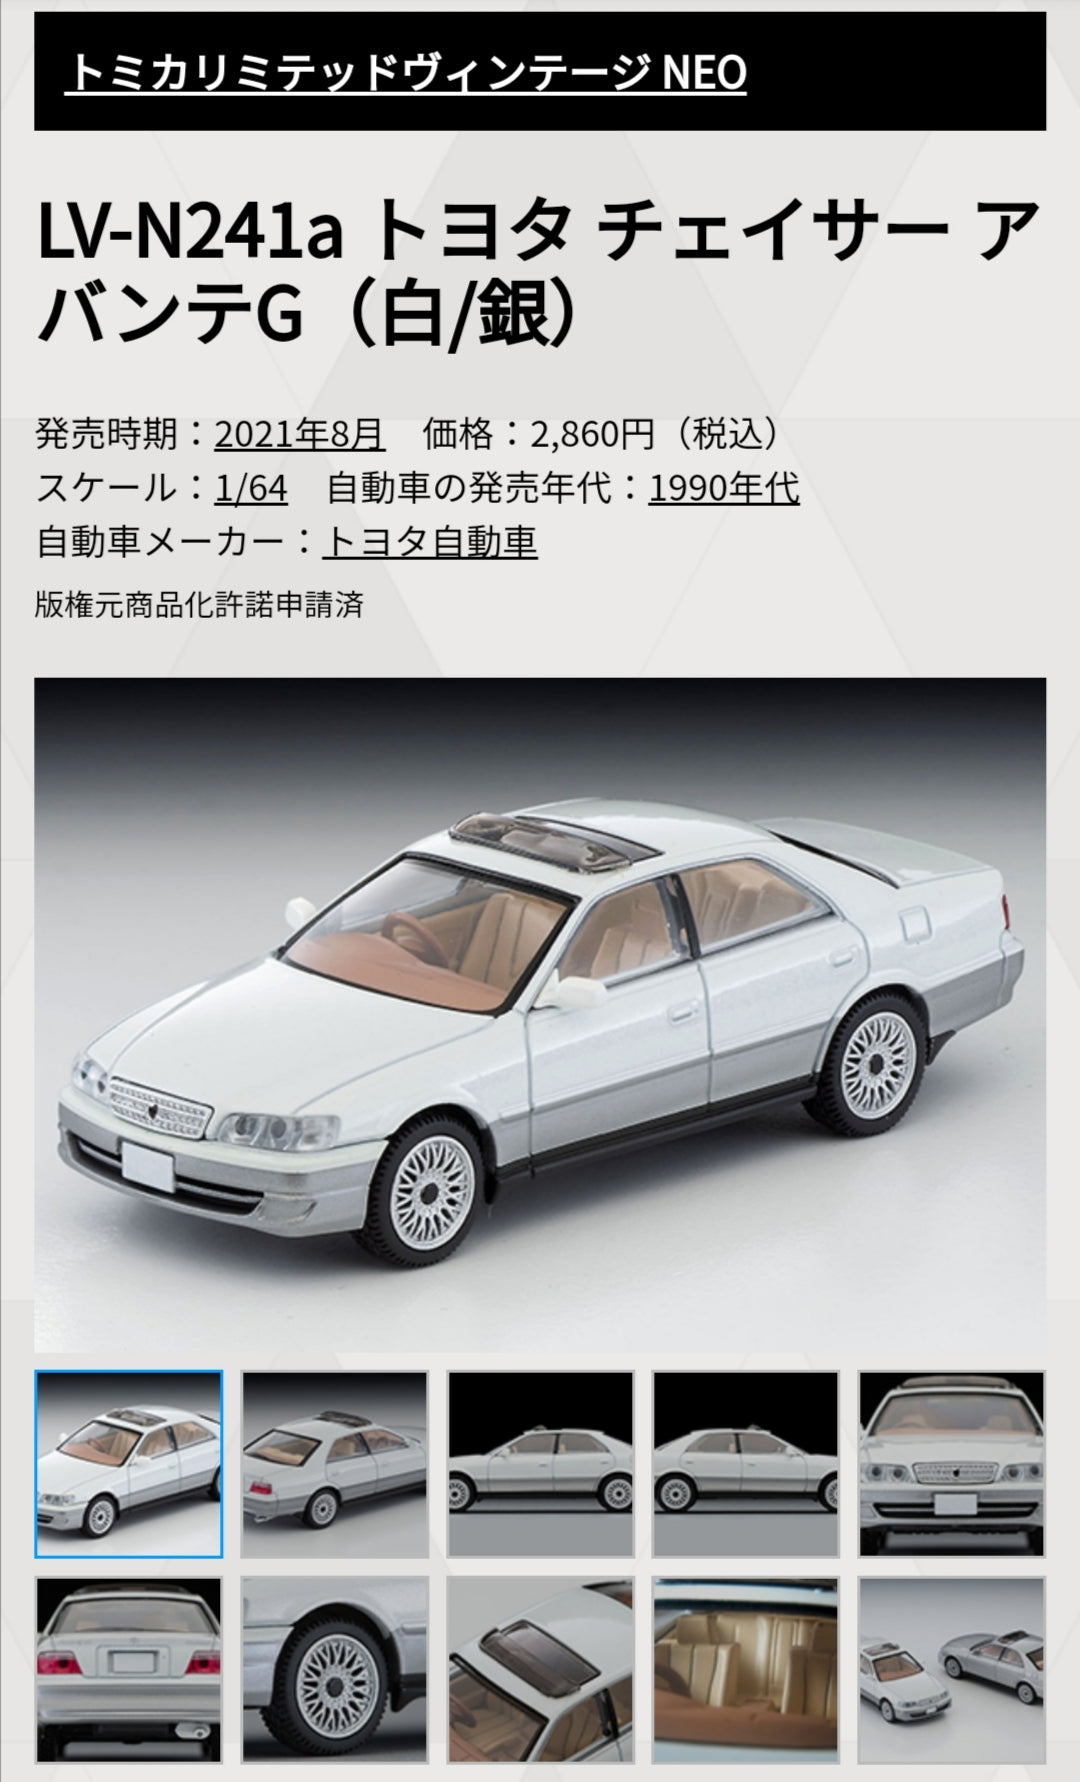 Tomica Limited Vintage Neo LV-N241a Toyota Chaser Avante G (white/silver)